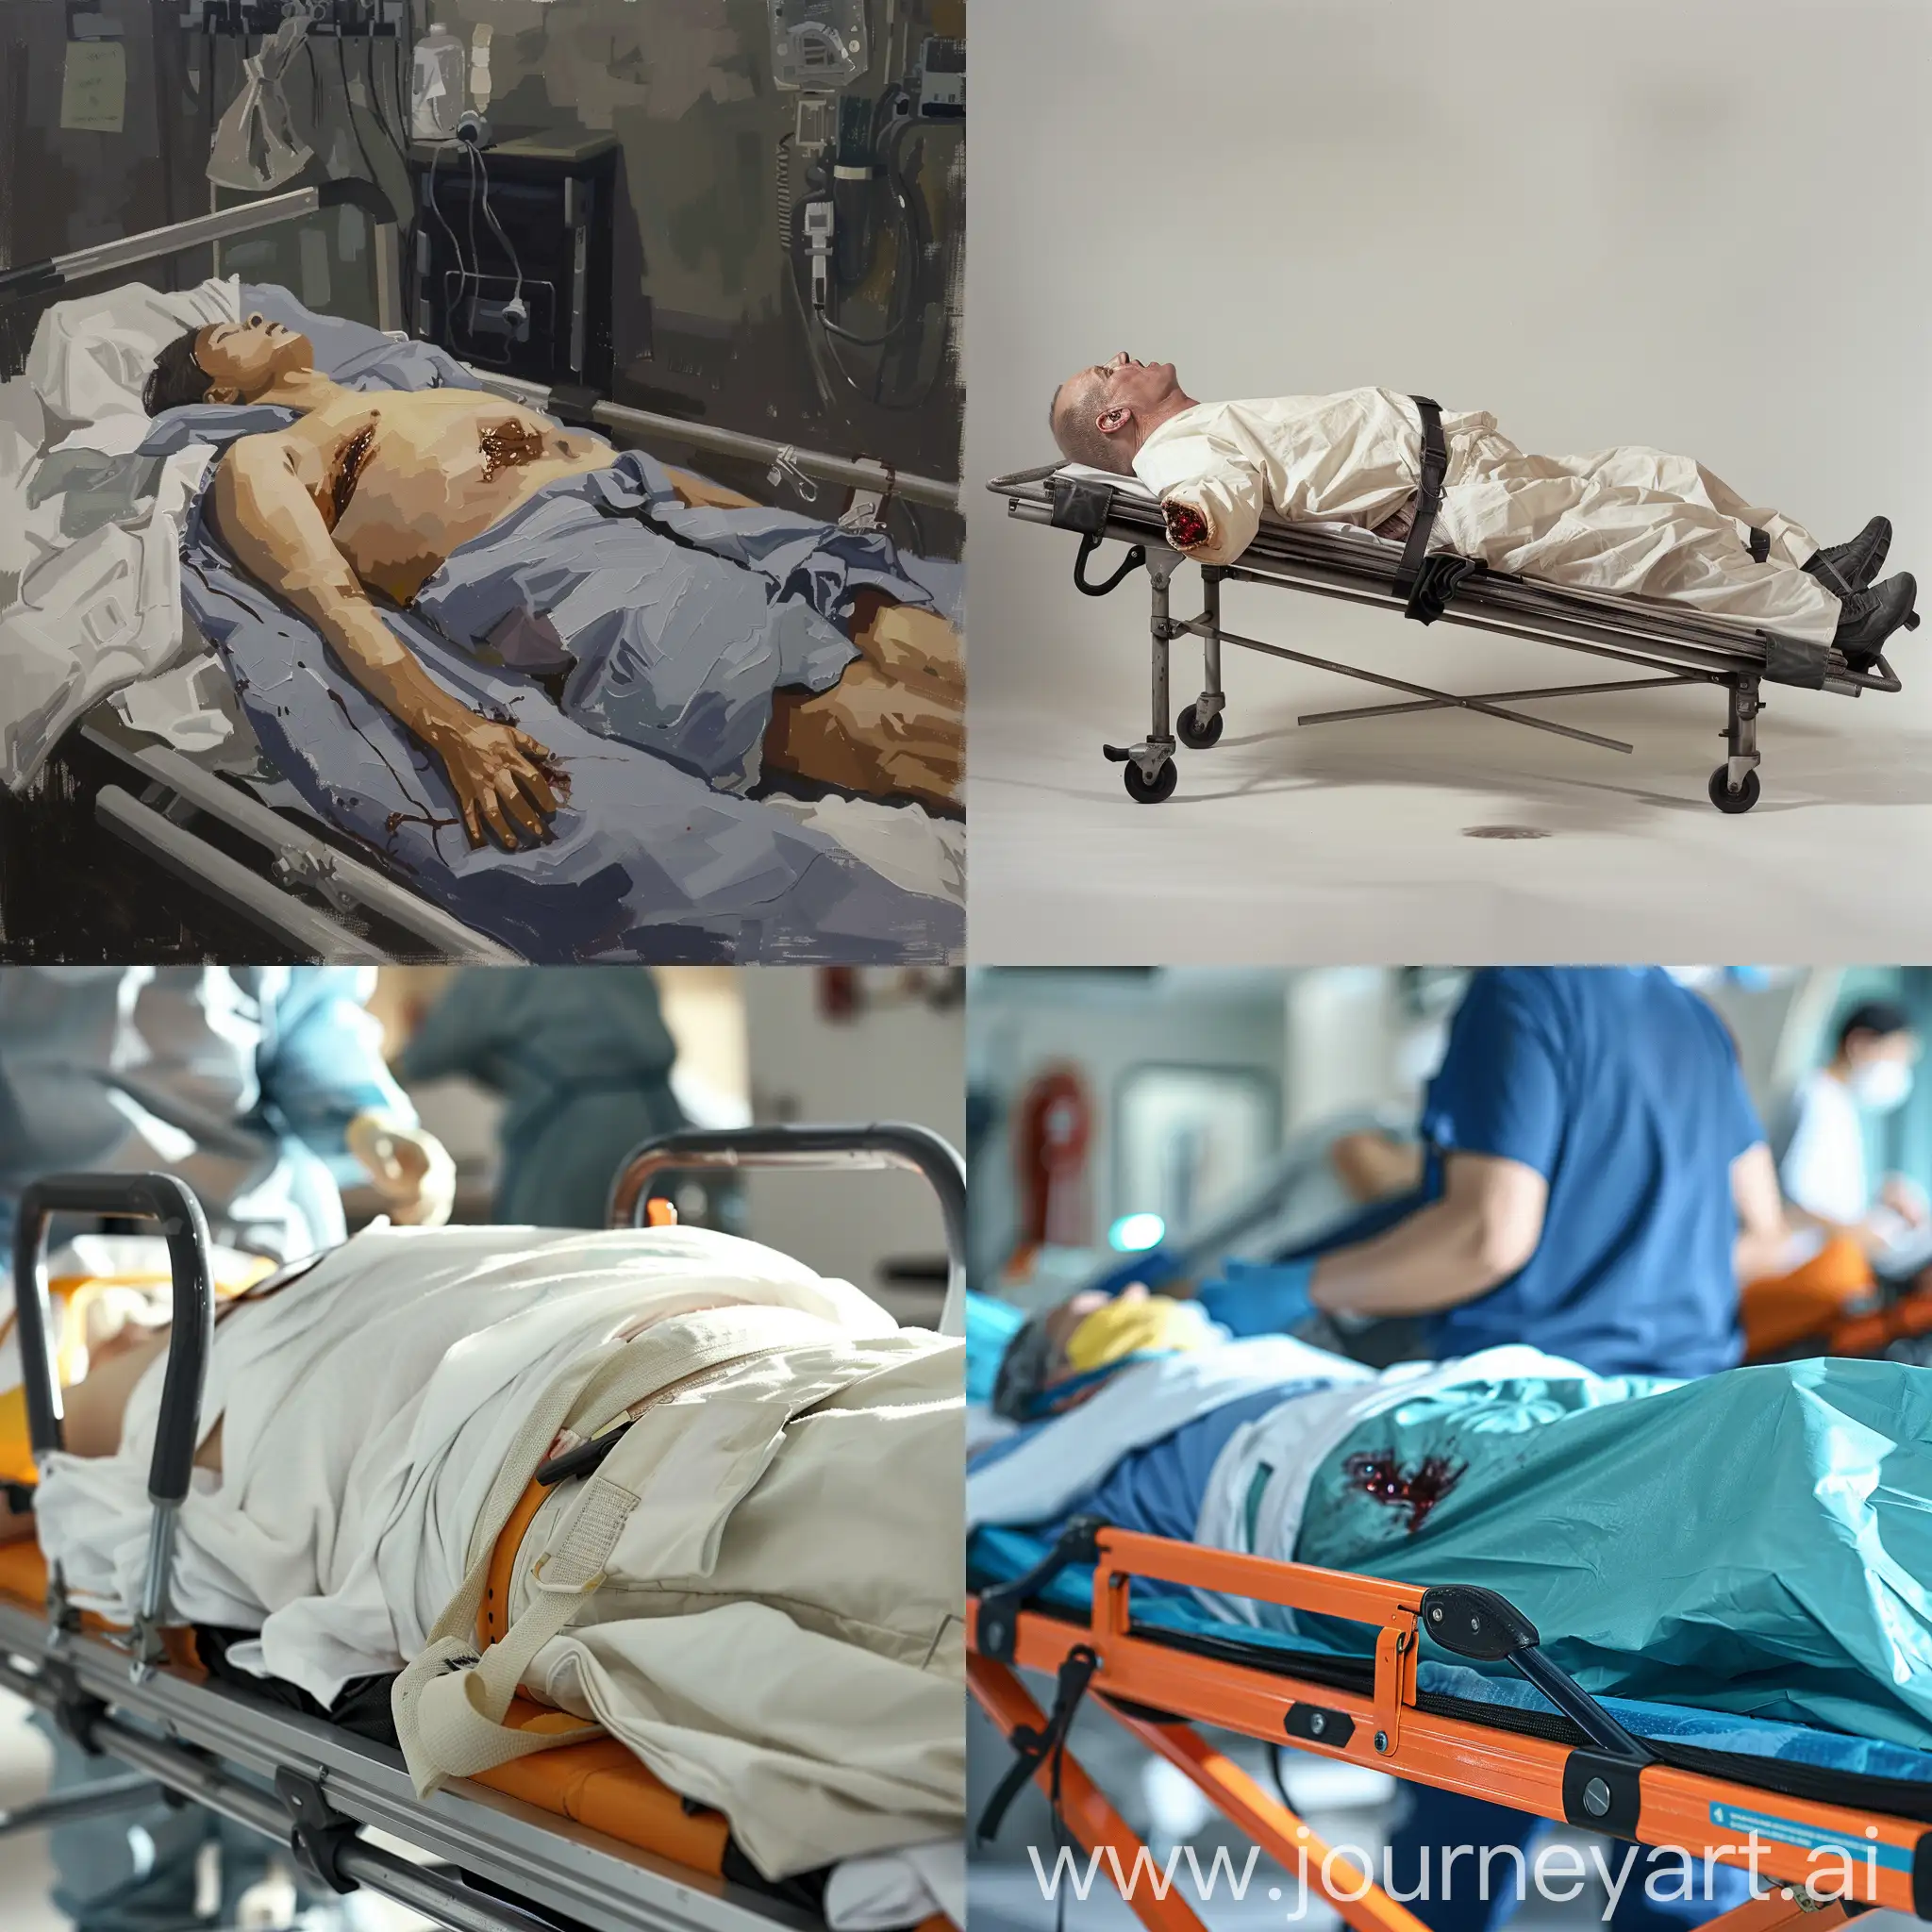 Emergency-Room-Scene-Patient-with-Abdominal-Injury-on-Stretcher